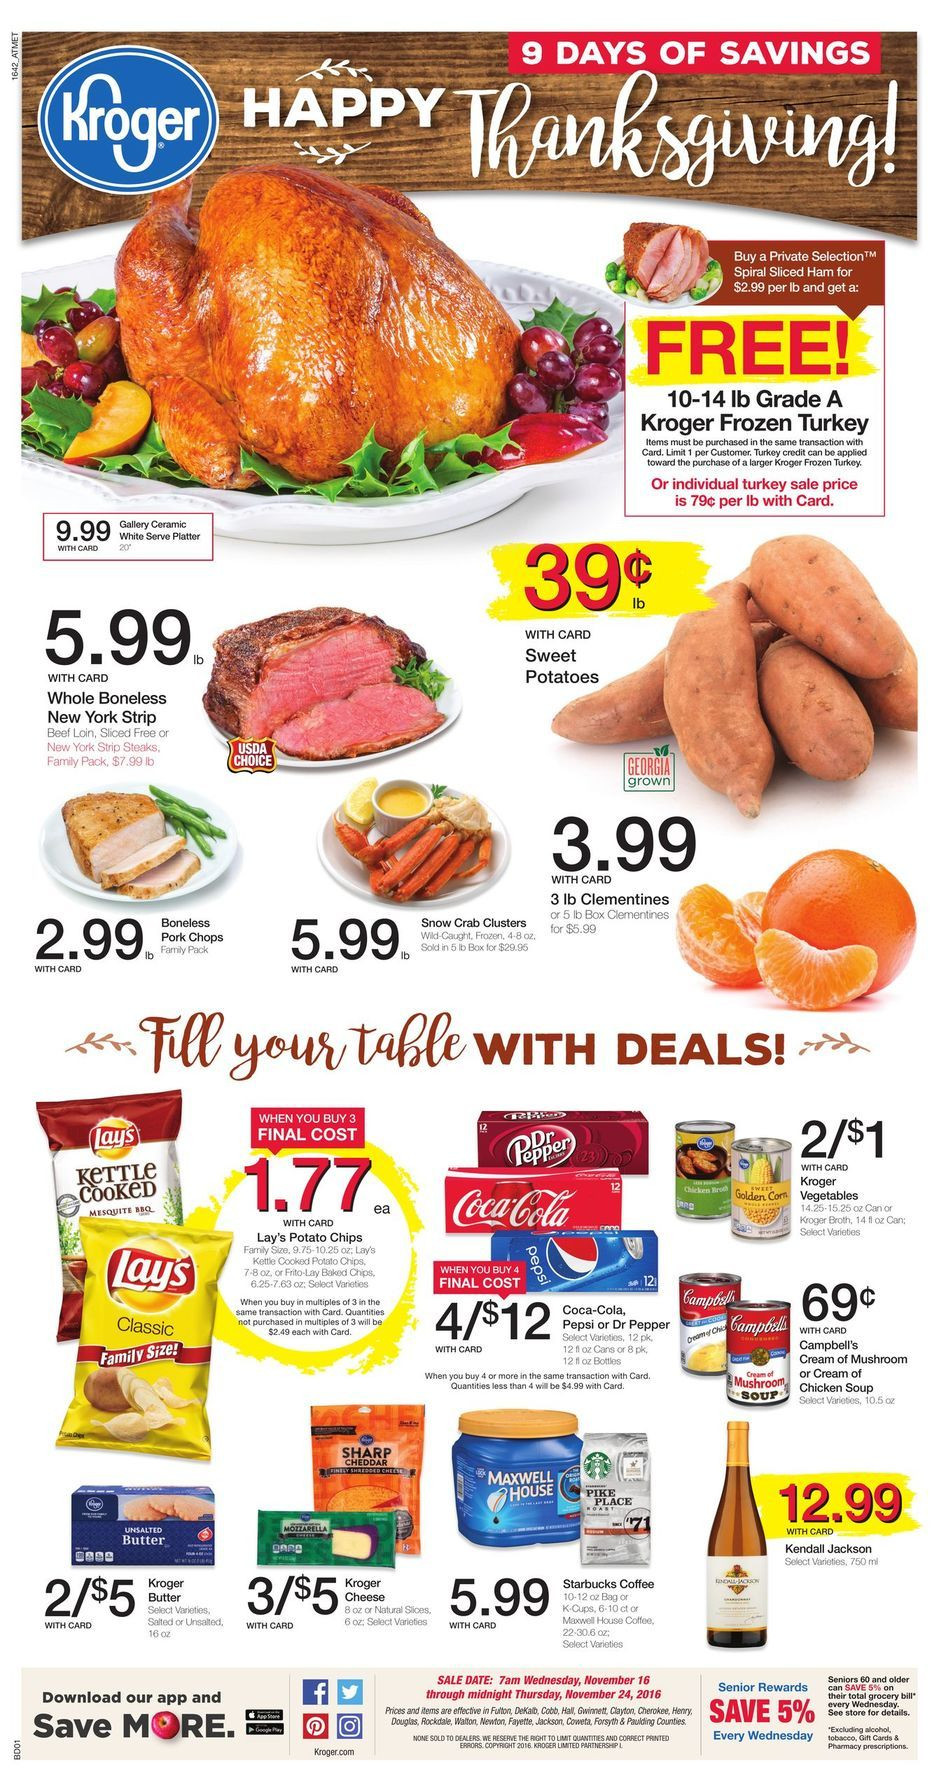 Top 30 King soopers Thanksgiving Dinners - Best Diet and ...